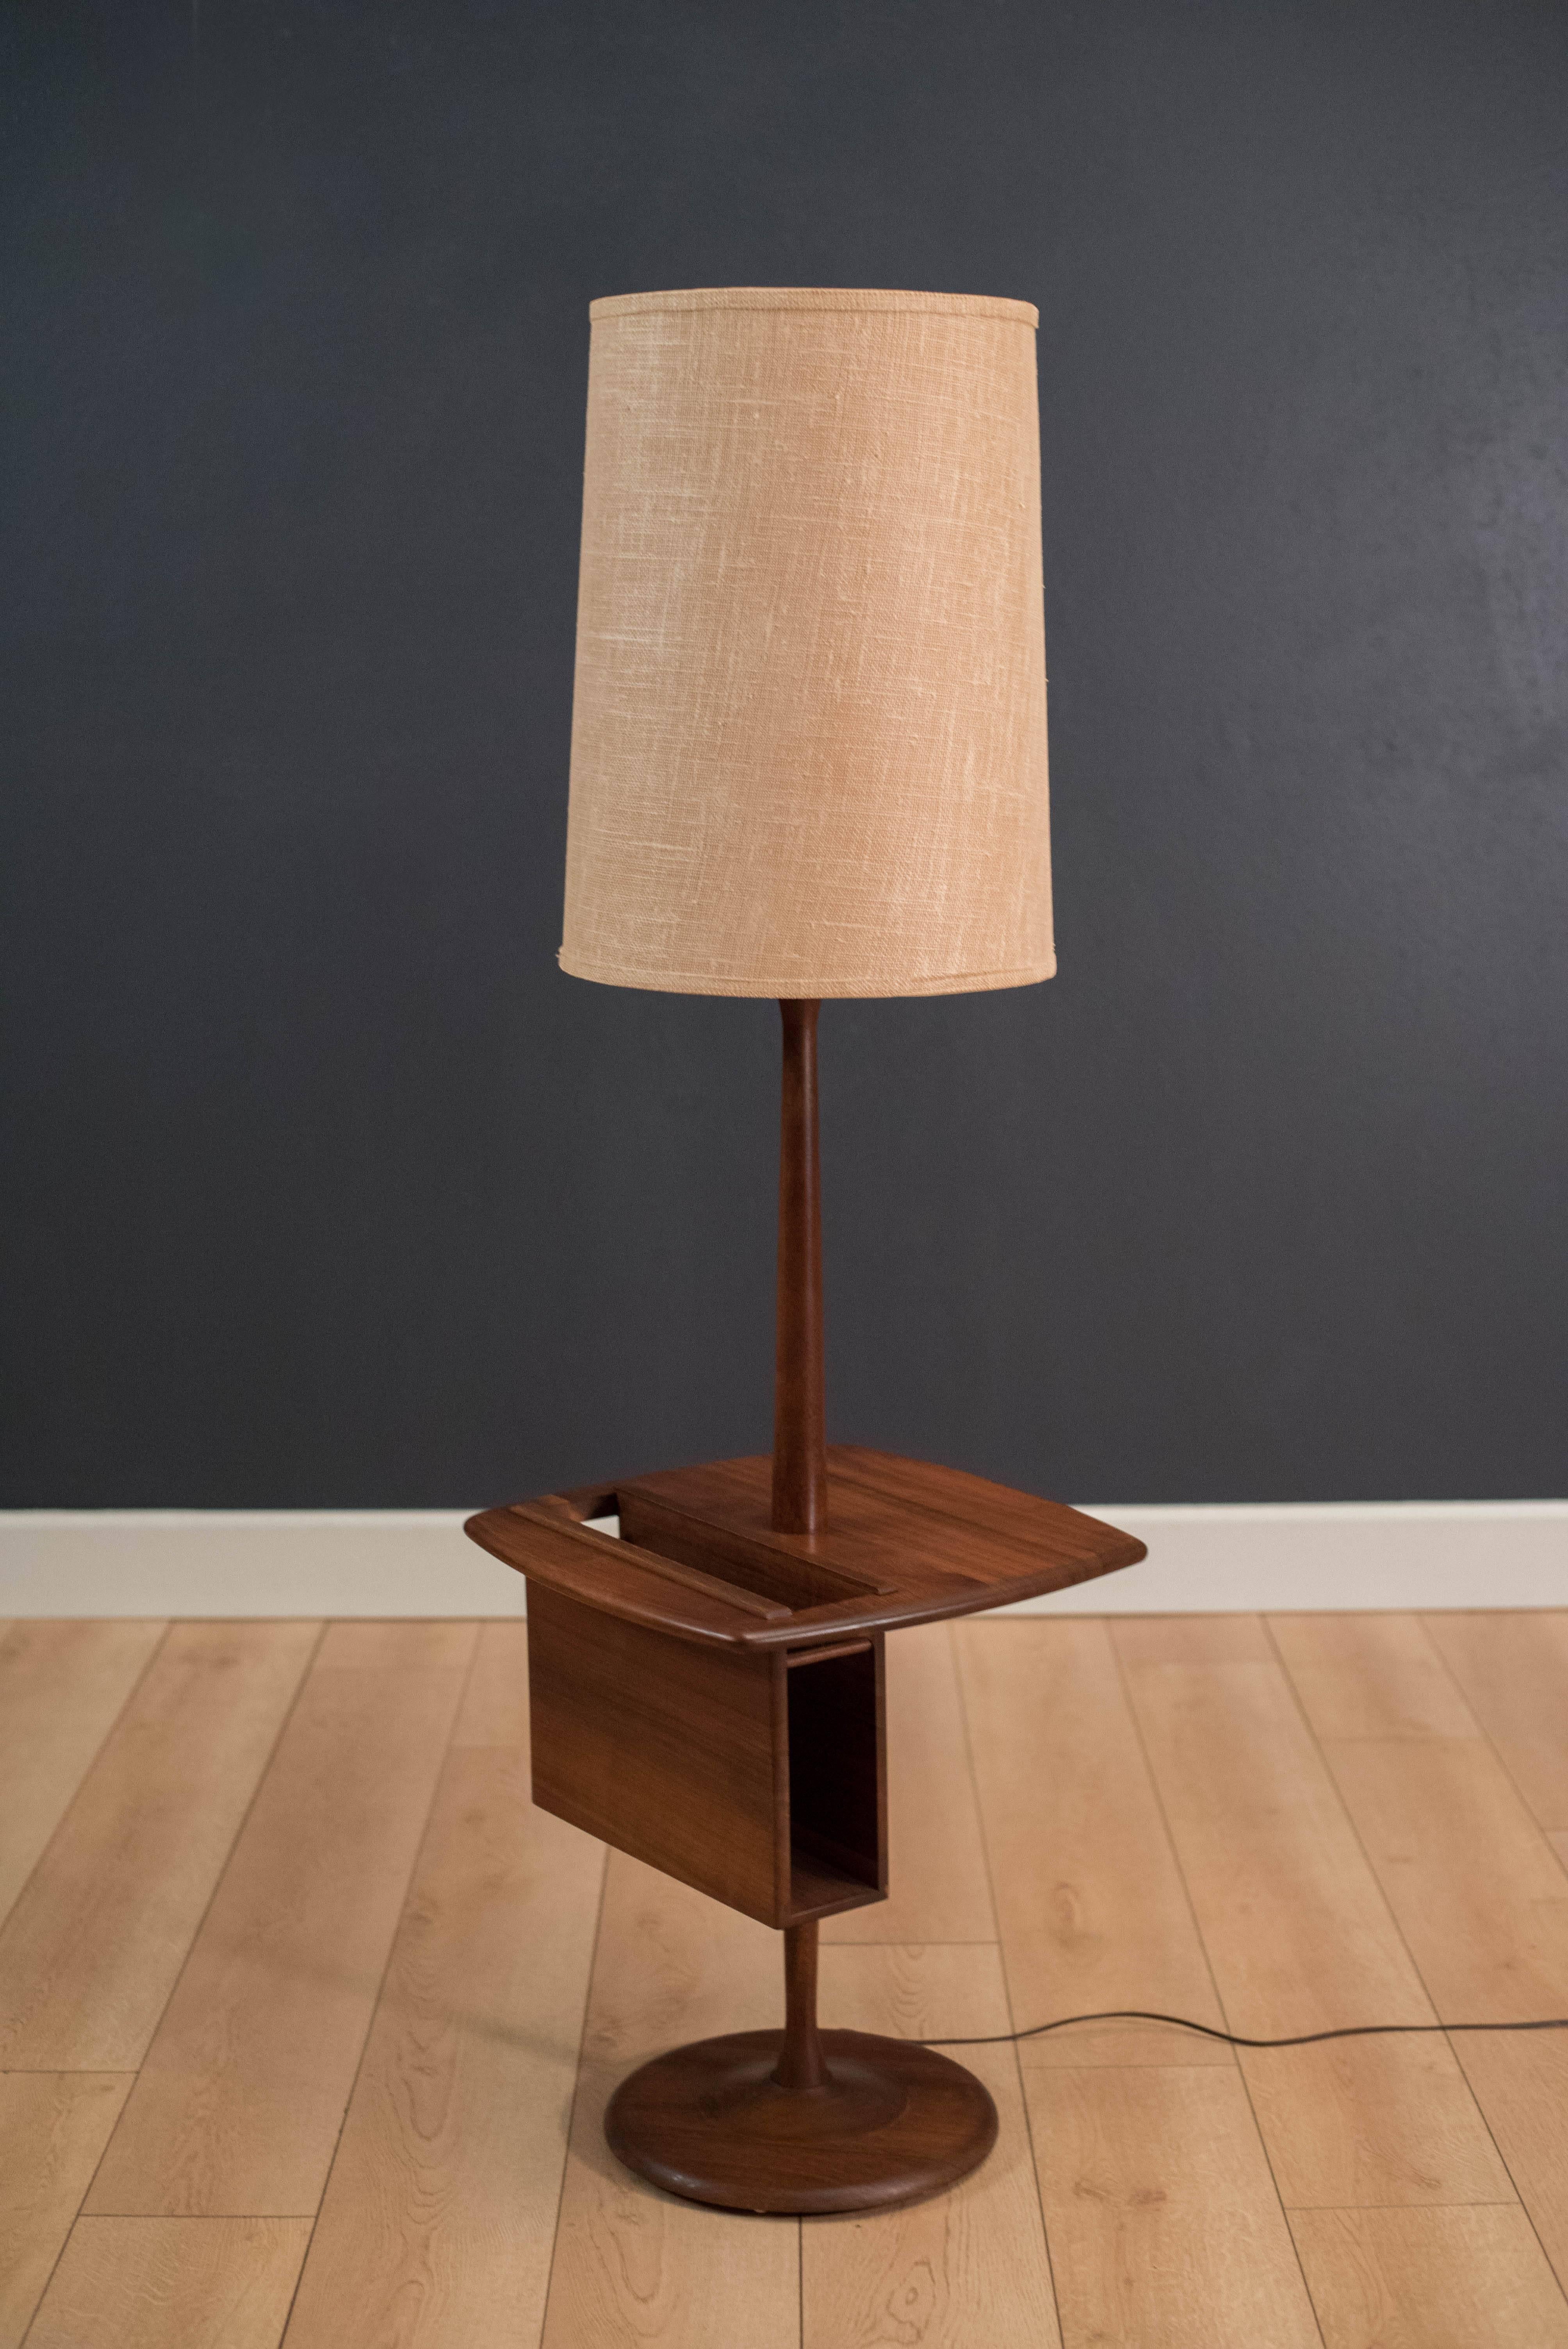 Vintage Laurel floor lamp in walnut with attached side table. This functional piece includes a magazine holder built in to the side table. Lamp has a three way switch mechanism and includes the shade. 

